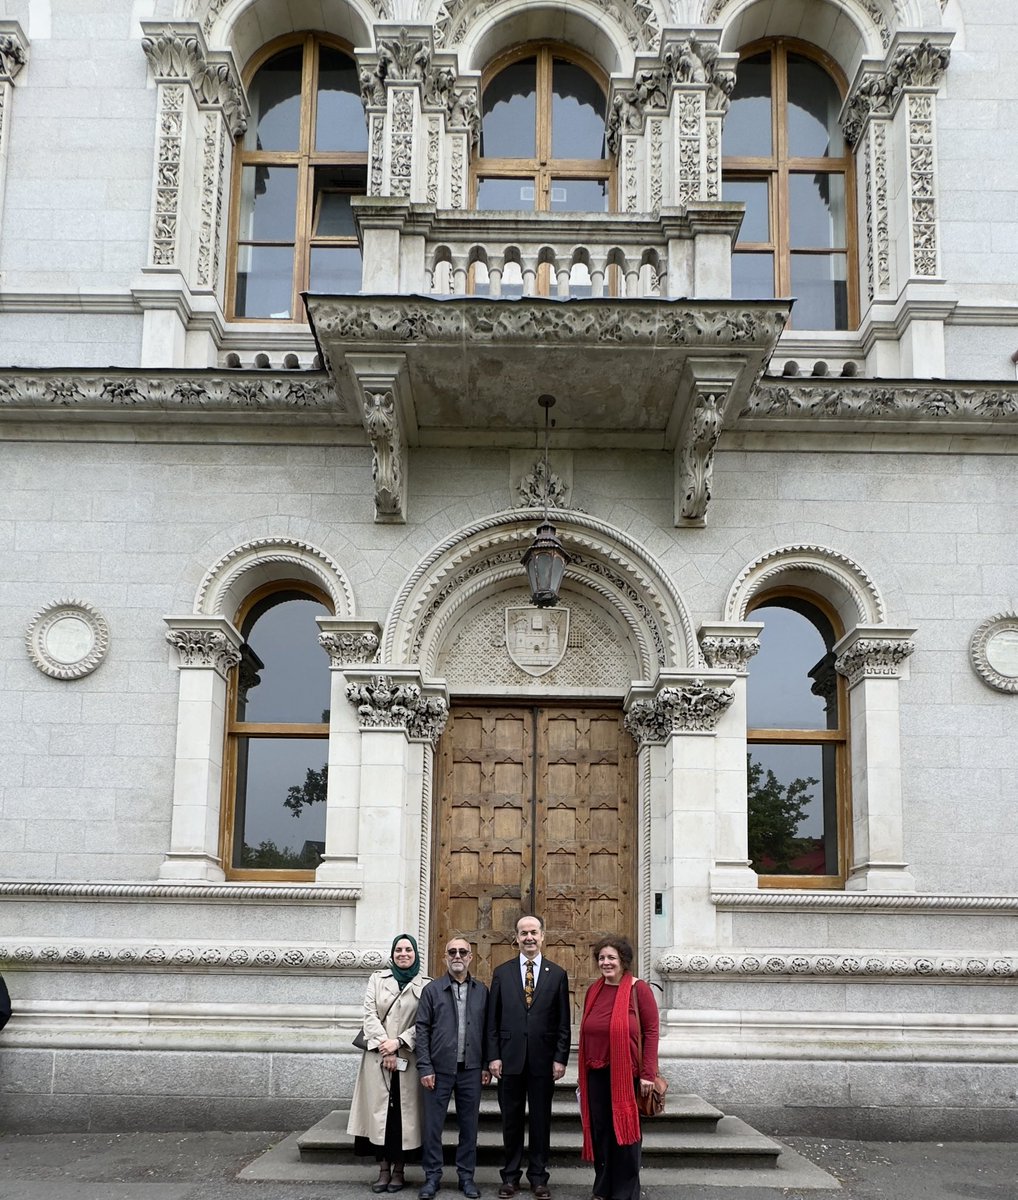 Today, before our program in Dublin, our president Prof. Dr. @serefatess met with Dr. Maya Petrovic, Yunus Emre Institute @yeeorgtr lecturer in Turkish Cultural History of Trinity College Dublin, and Dr. Murat Şiviloğlu, chair of the Near and Middle East Department at @tcddublin.